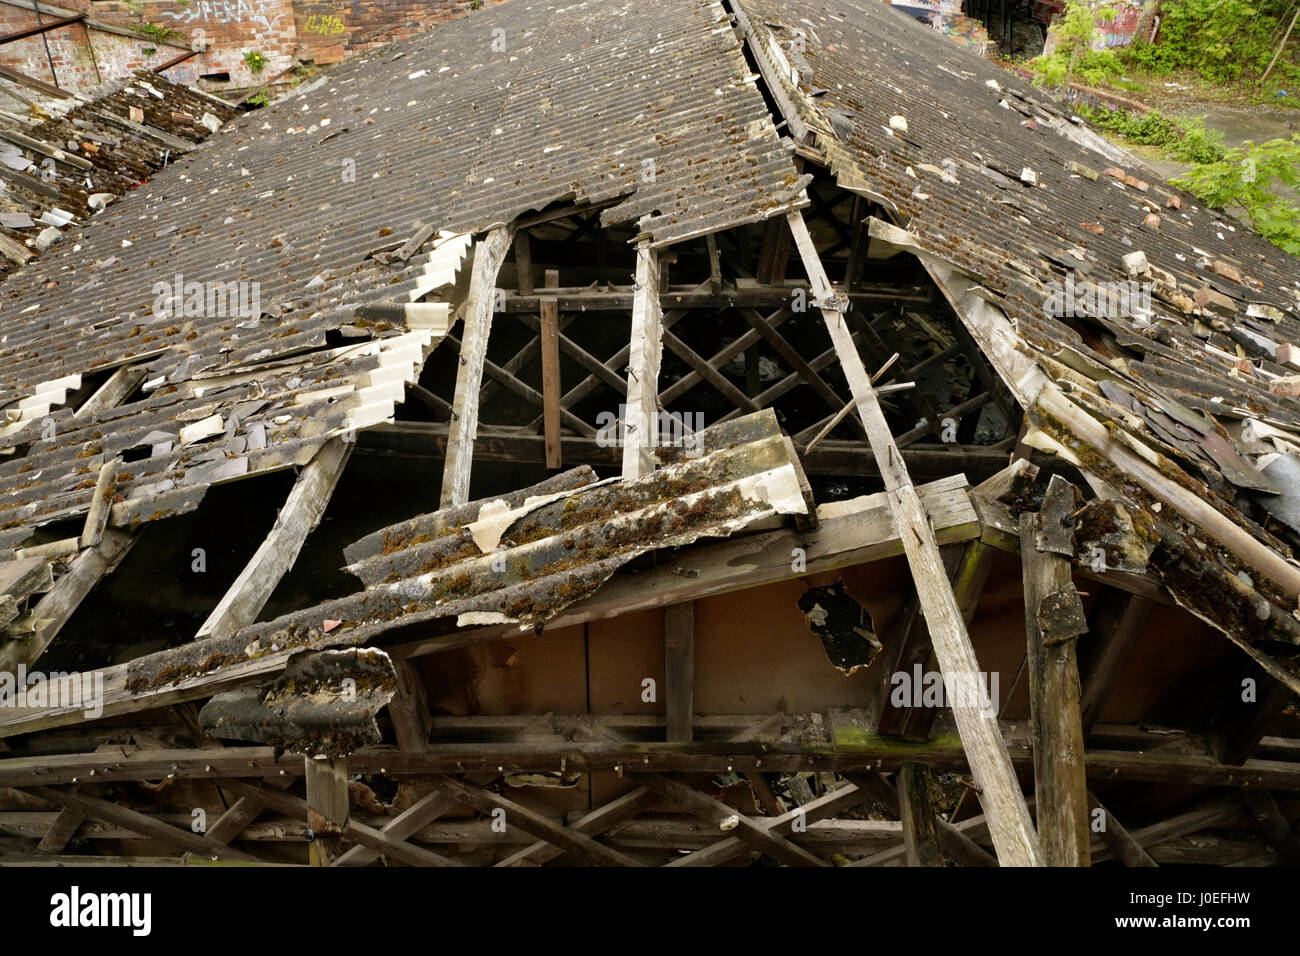 Damaged corrugated asbestos roof on old abandoned industrial building. Stock Photo